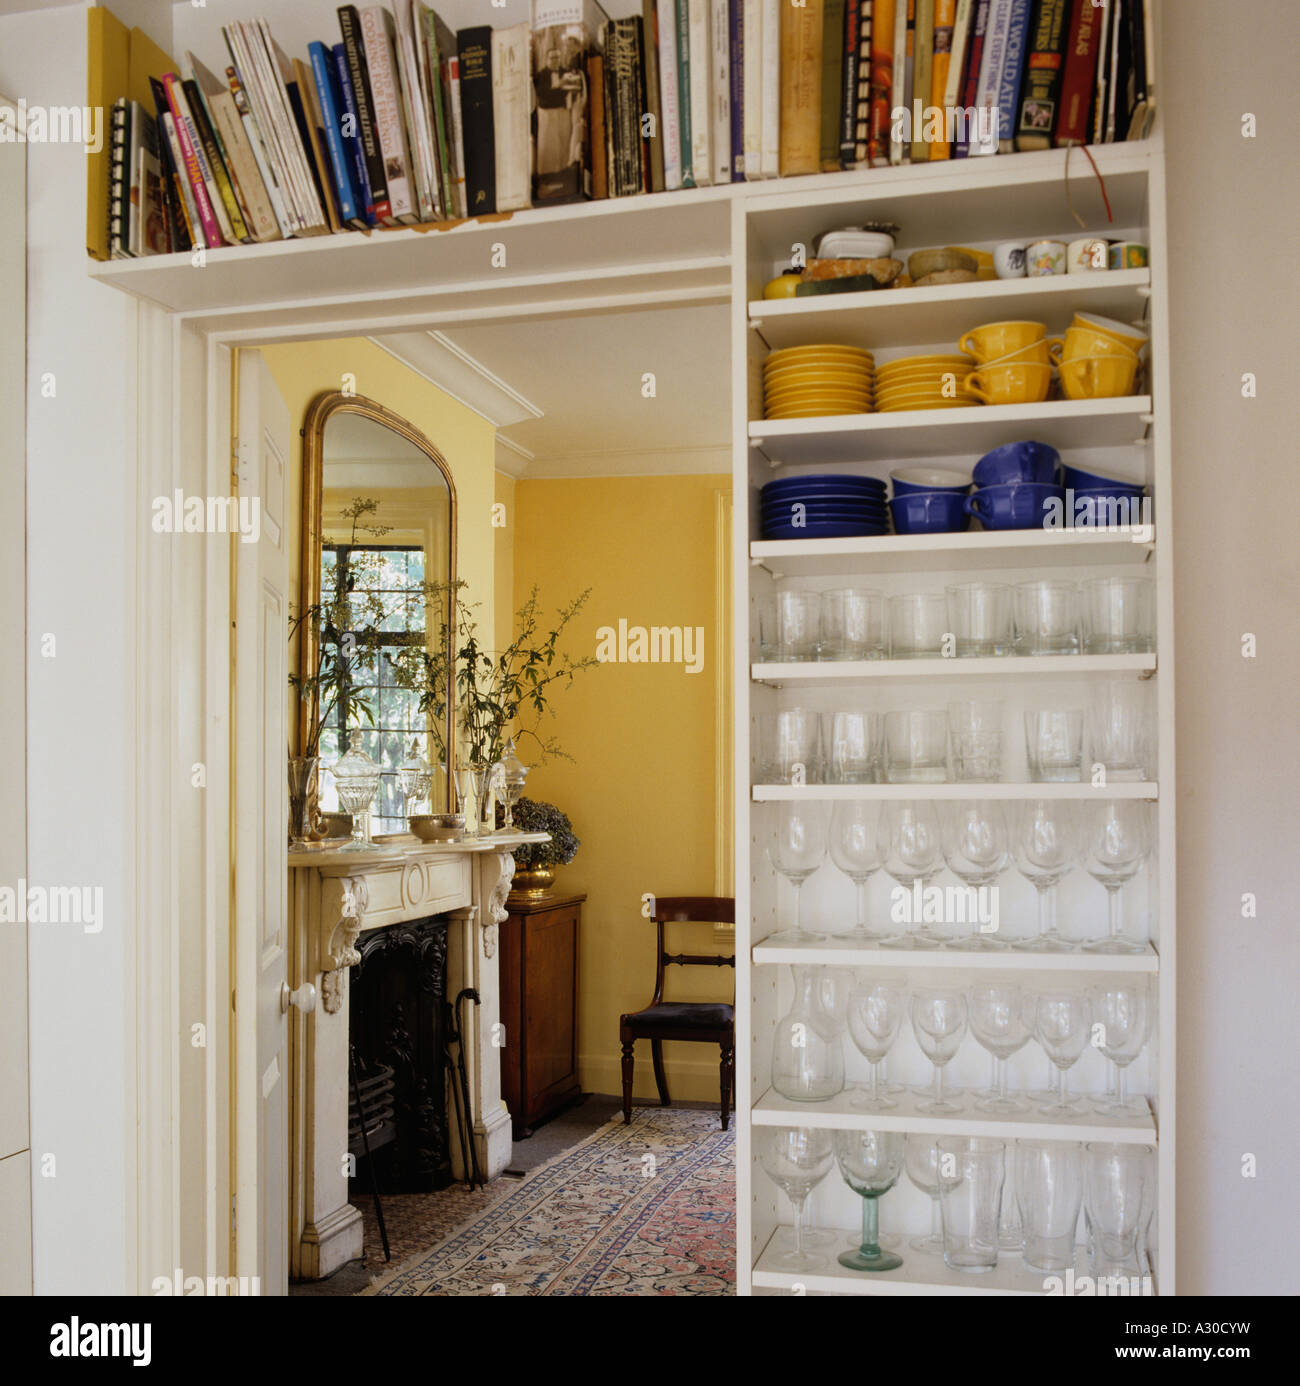 Doorway with shelf holding books, crockery and wineglasses looking through to room with mantelpiece. Stock Photo